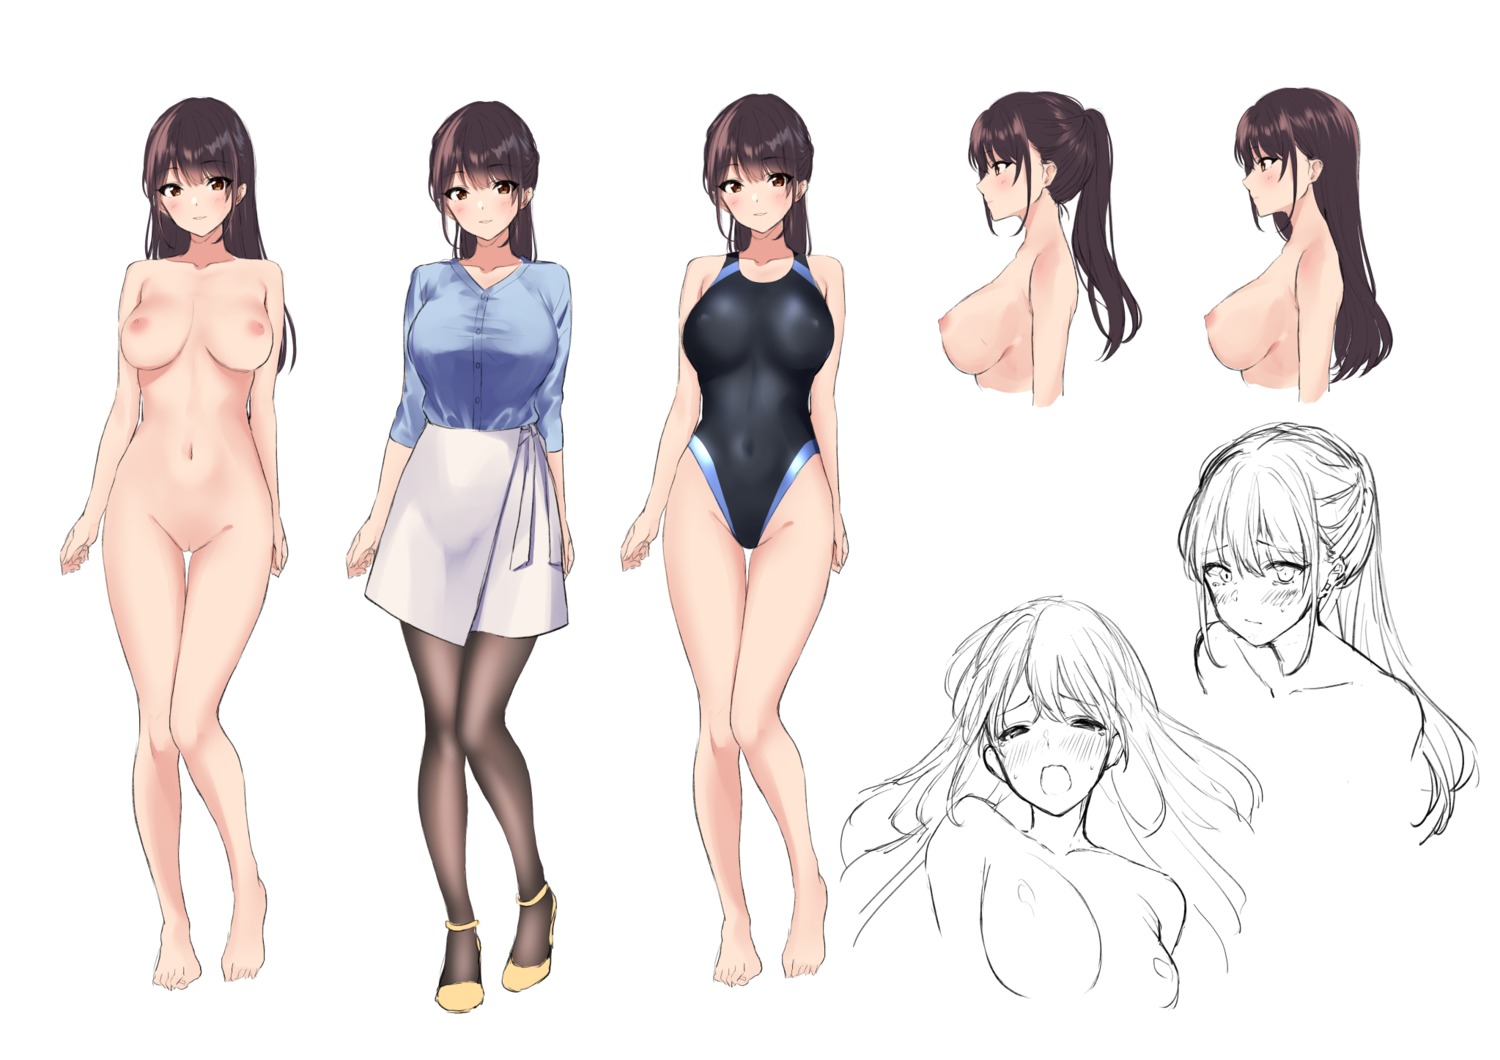 amagi_shino character_design heels naked nipples pantyhose pussy sketch swimsuits topless